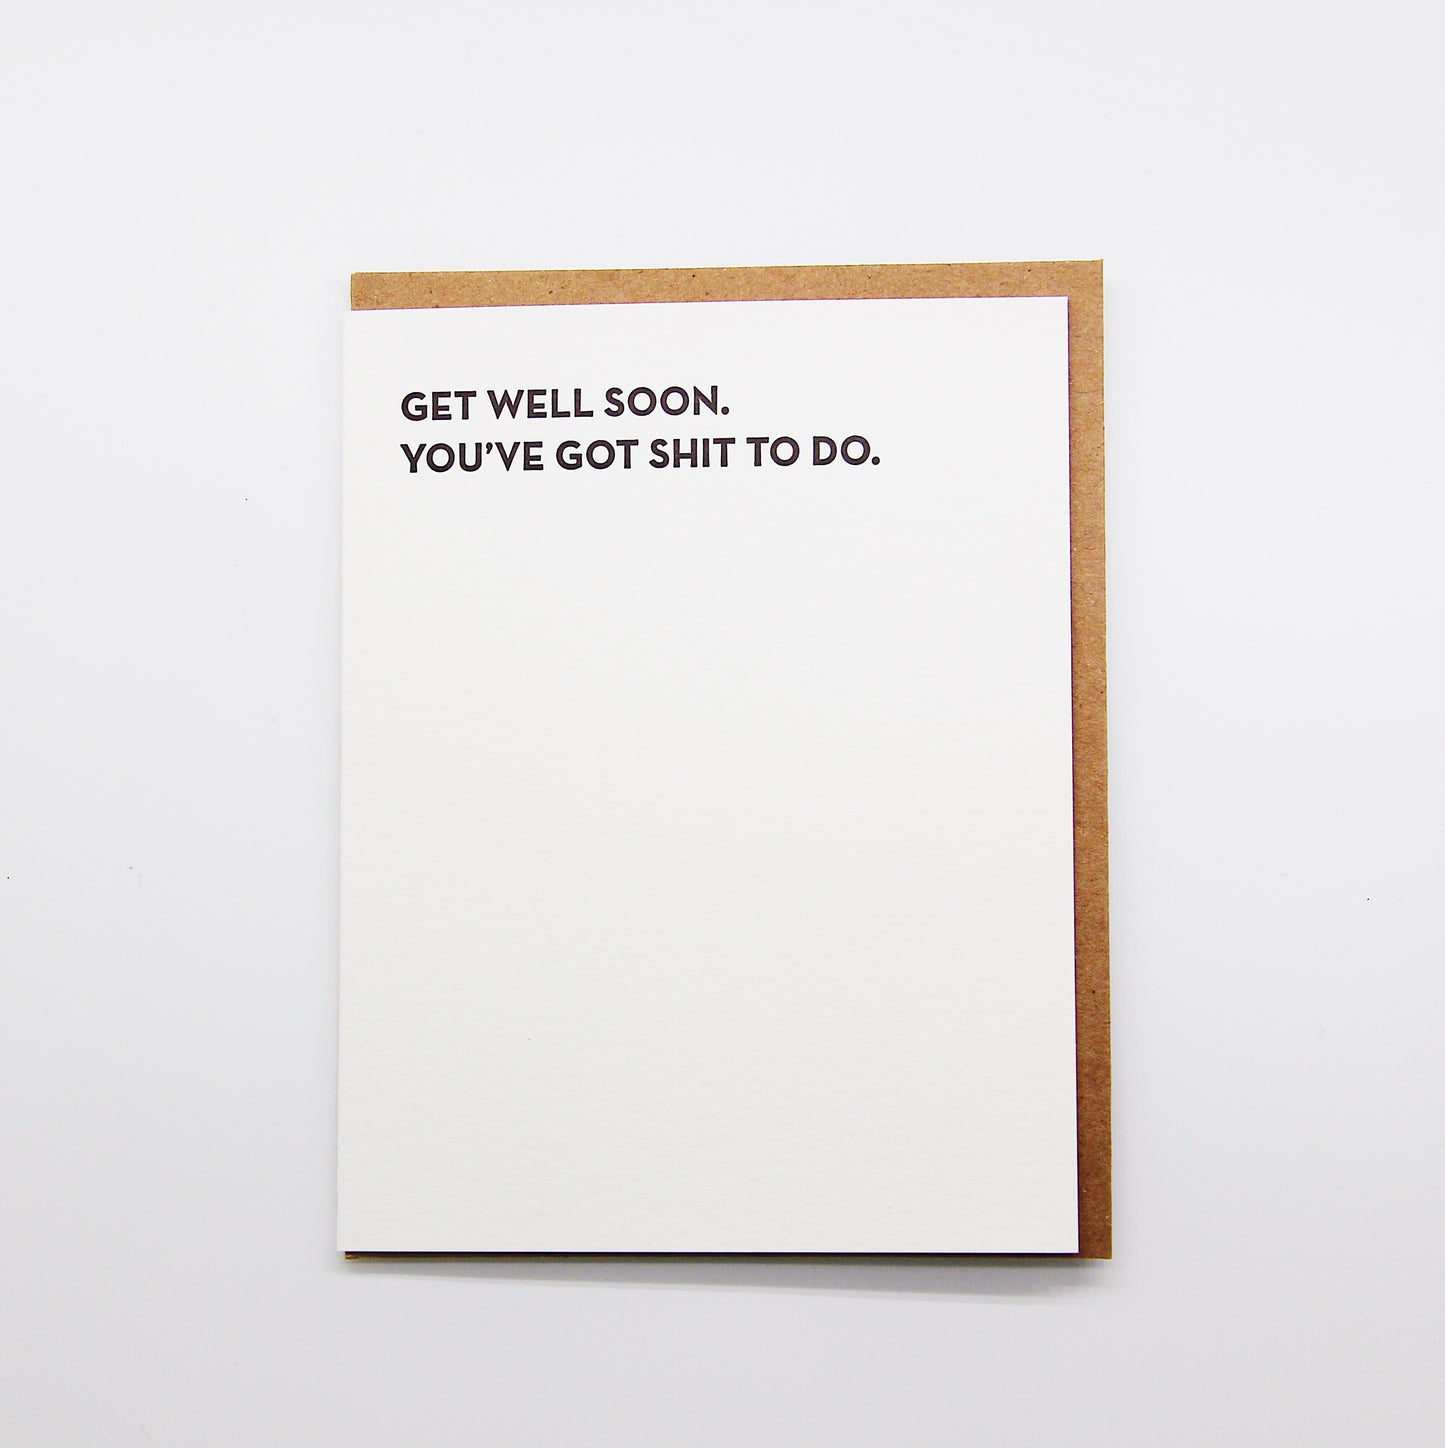 Get Well Soon. sh*t to do card